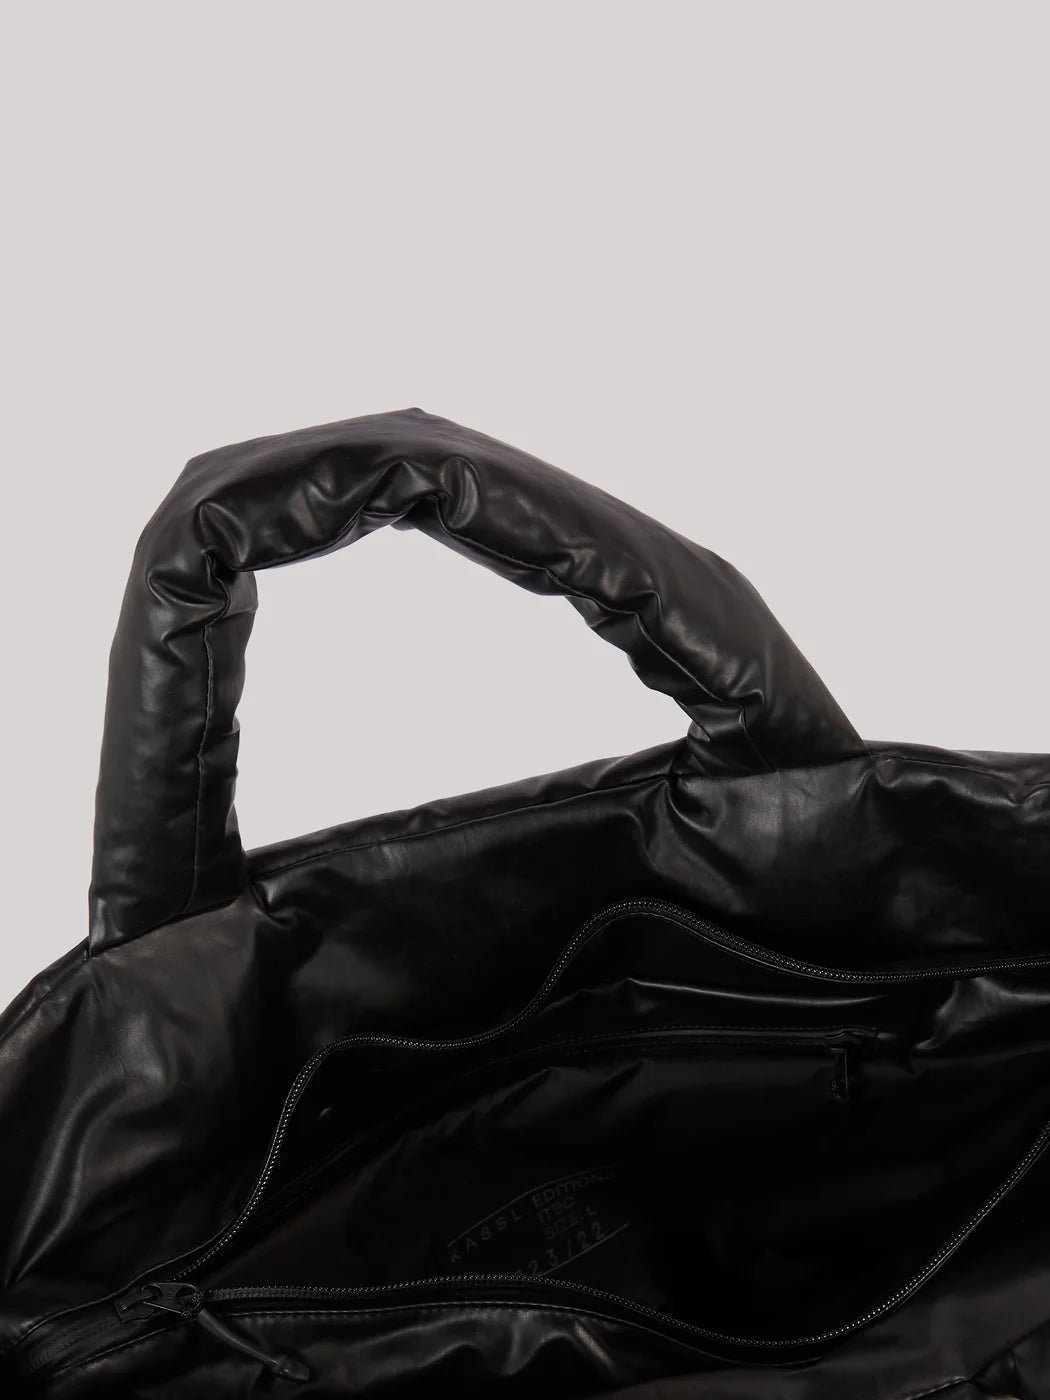 Oversized bag in oil black by Kassl Editions